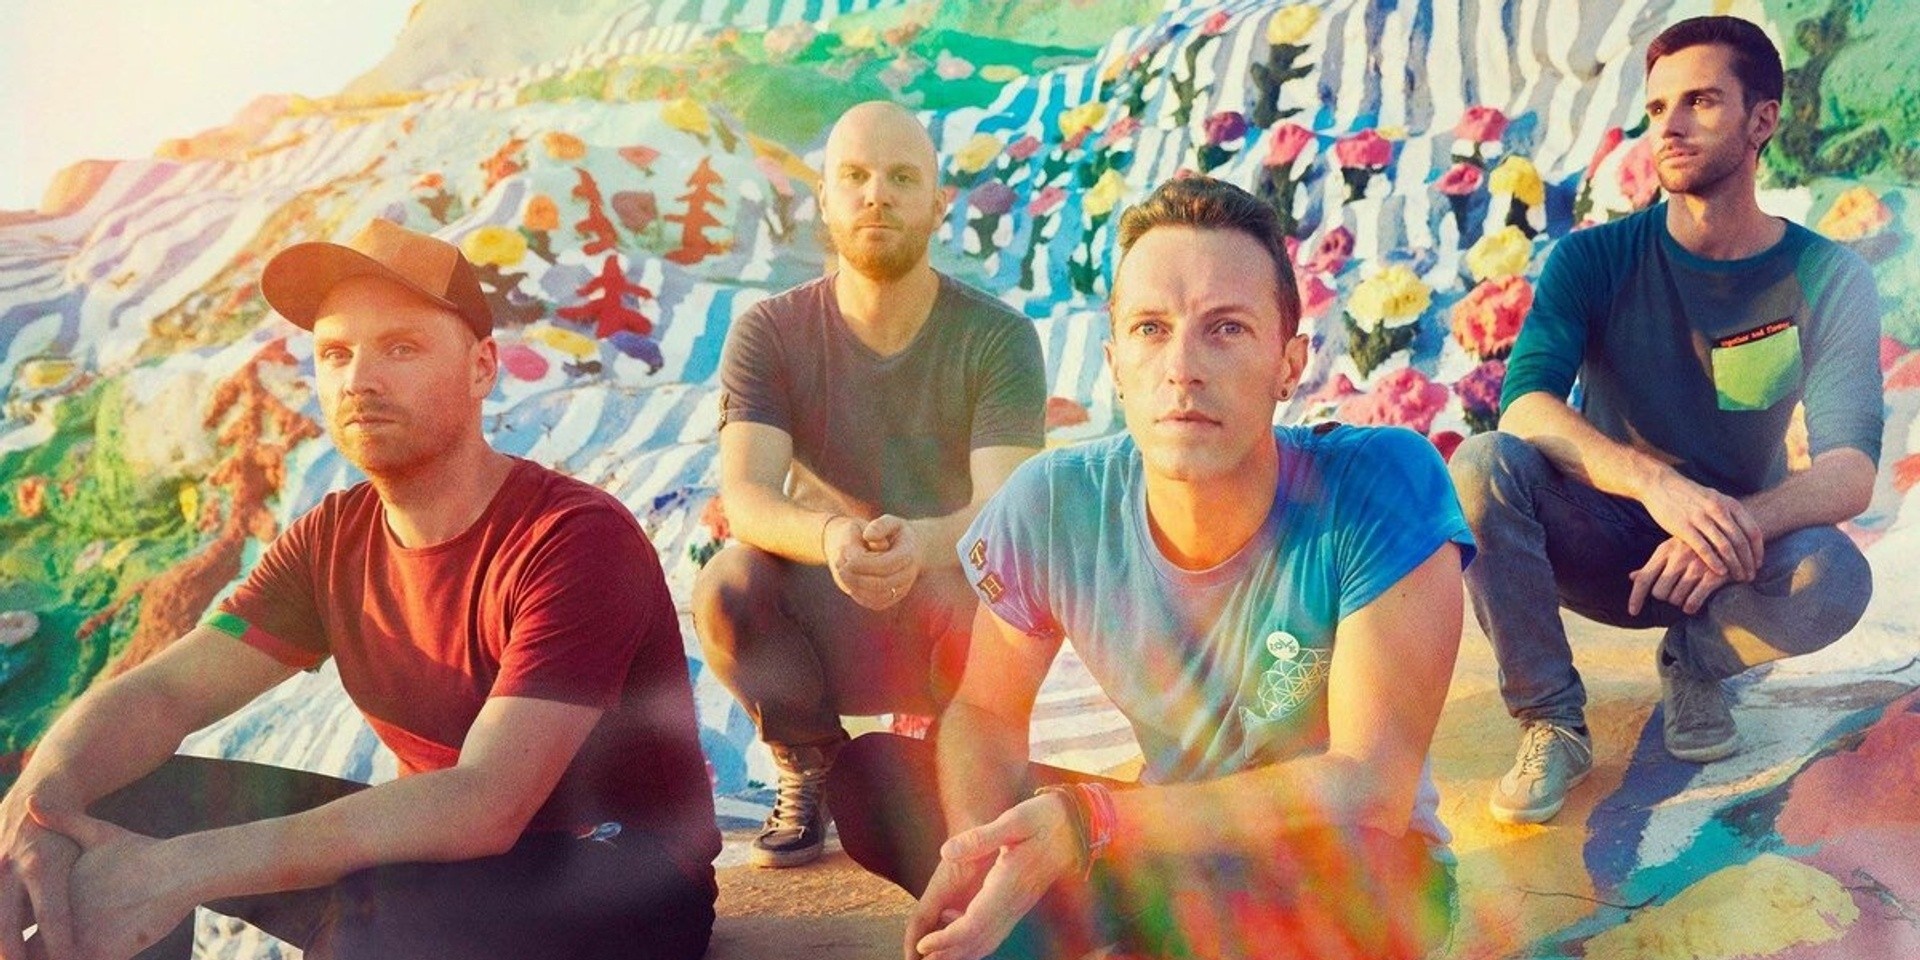 Globe Coldplay pre-sale sells out in 6 minutes